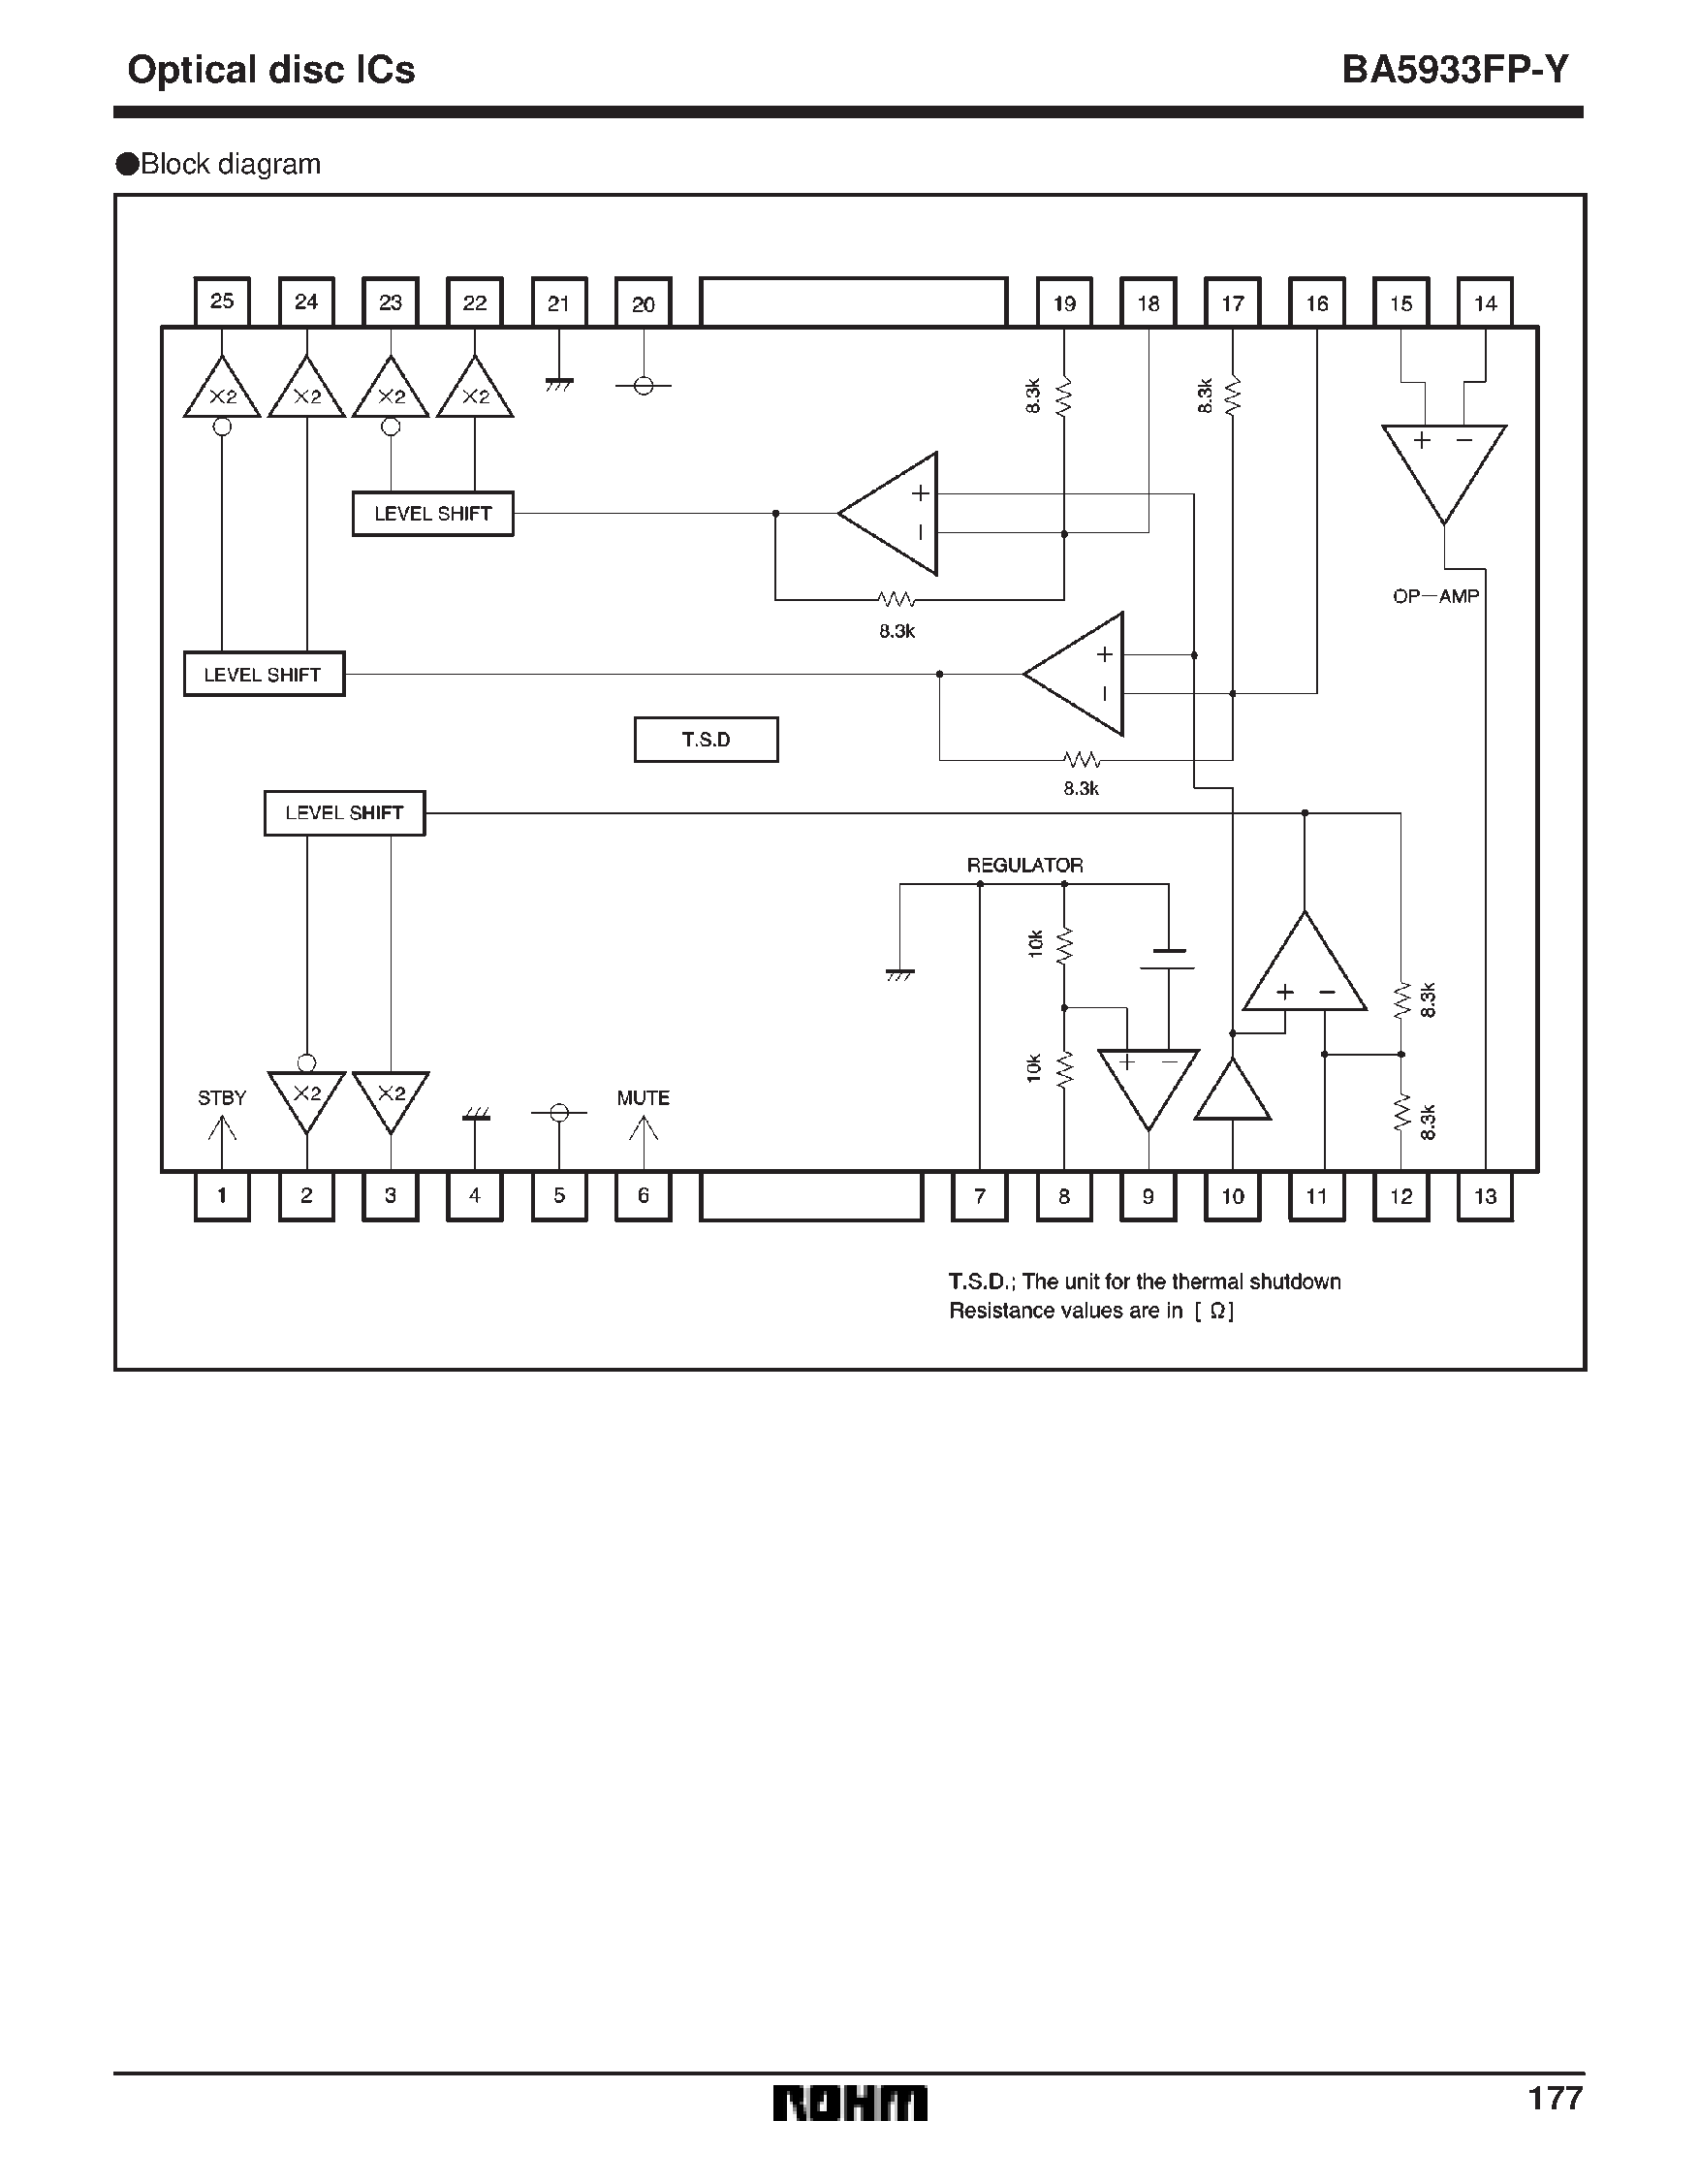 Datasheet BA5933FP-Y - 3-channel BTL driver for CD players page 2